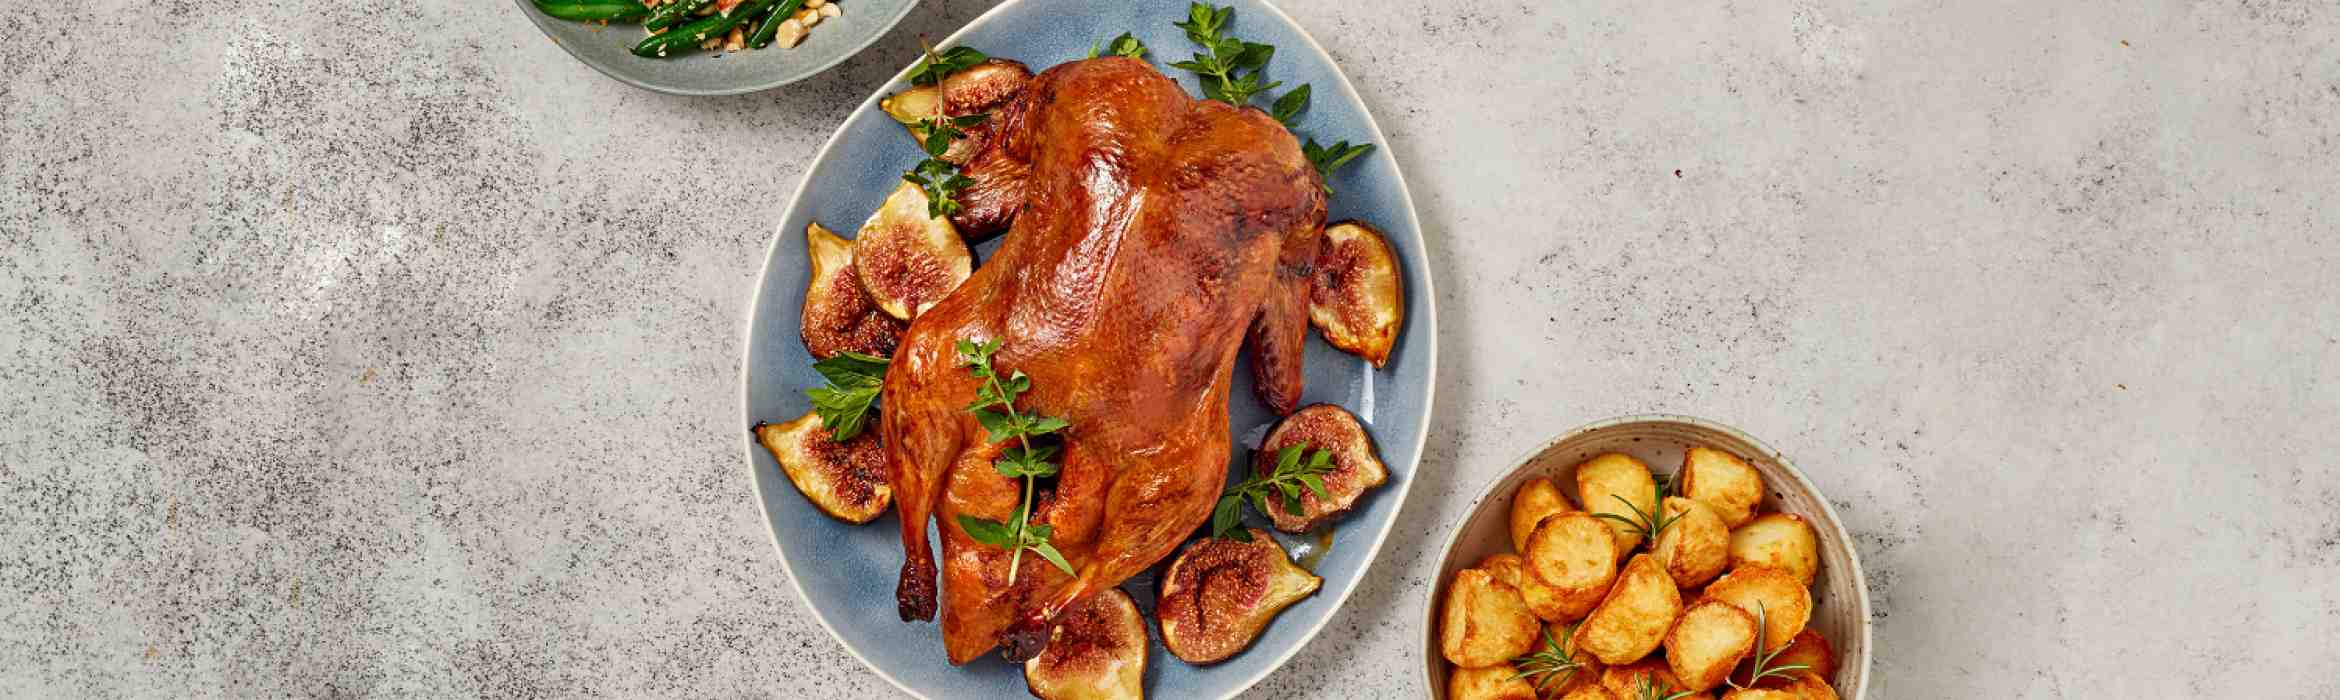 Whole Duck with Figs & Potatoes